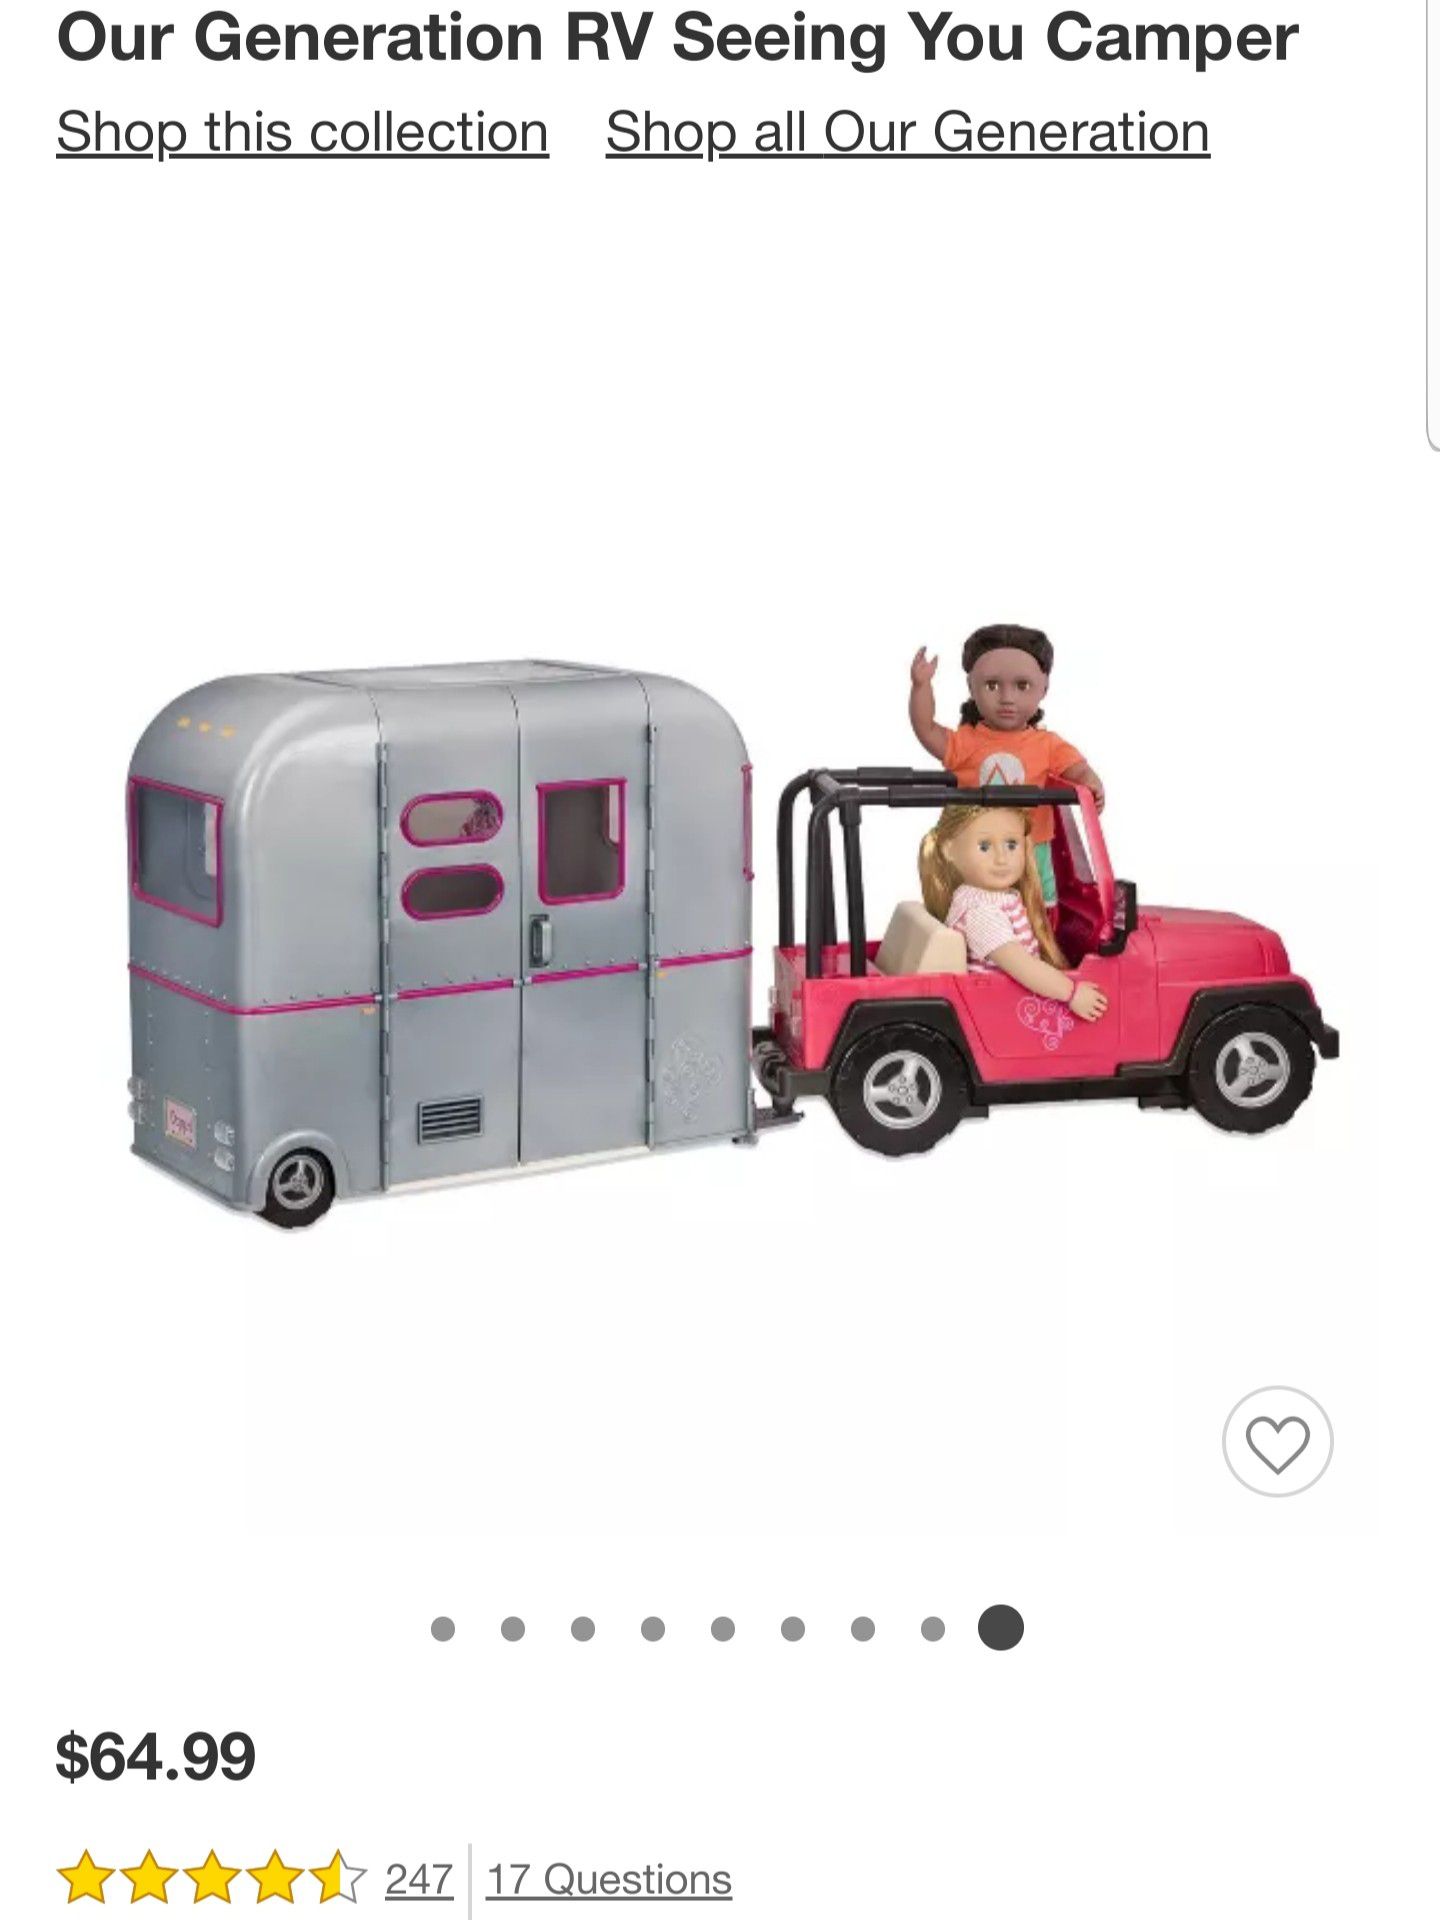 Our Generation RV Seeing You Camper - Jeep sold separately in another post